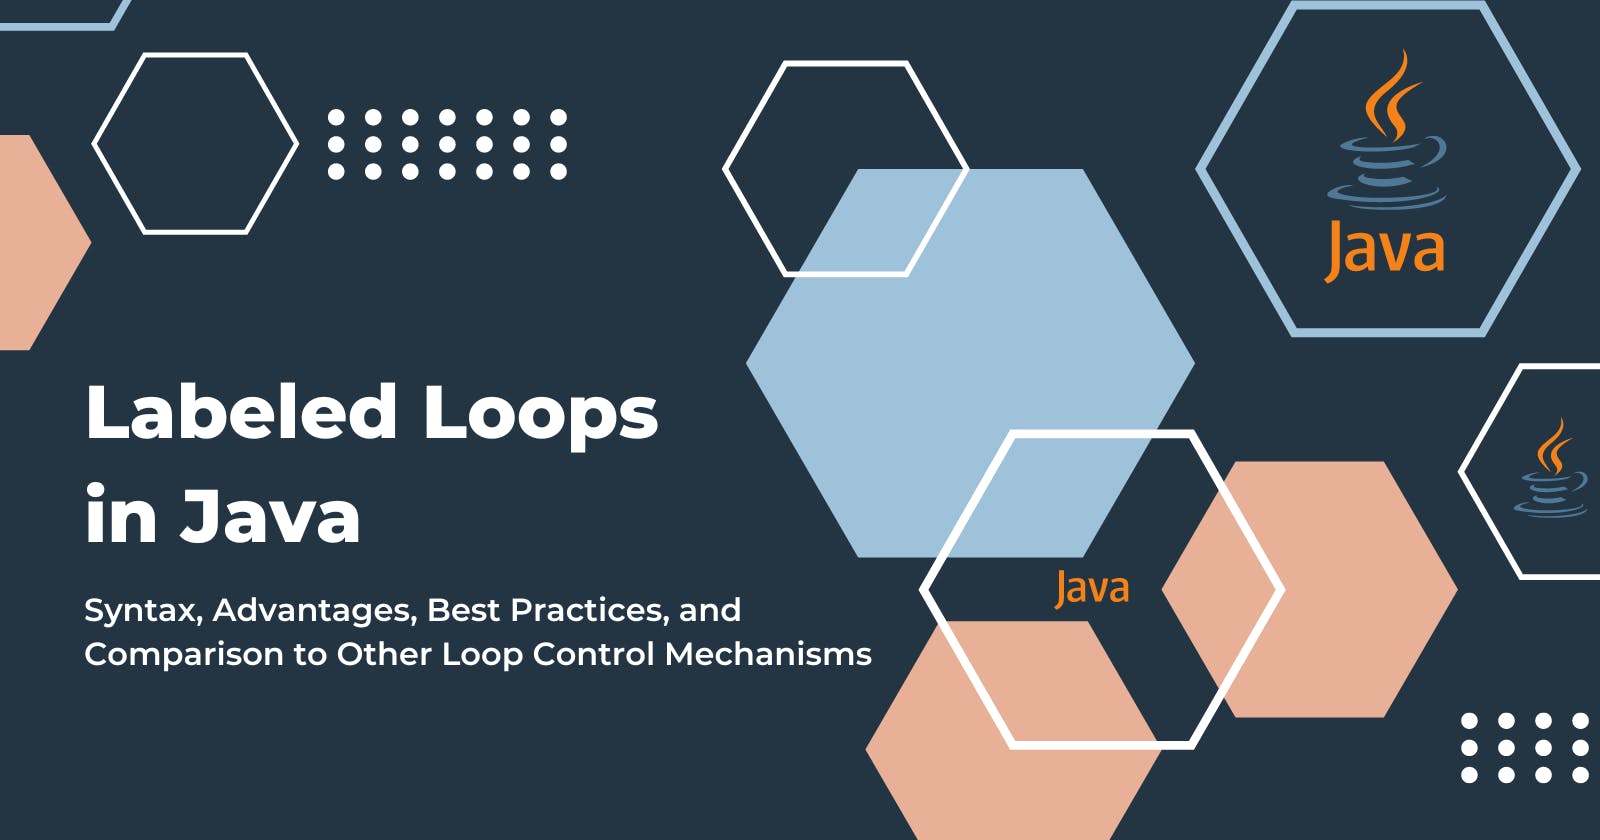 The Power of Labeled Loops in Java